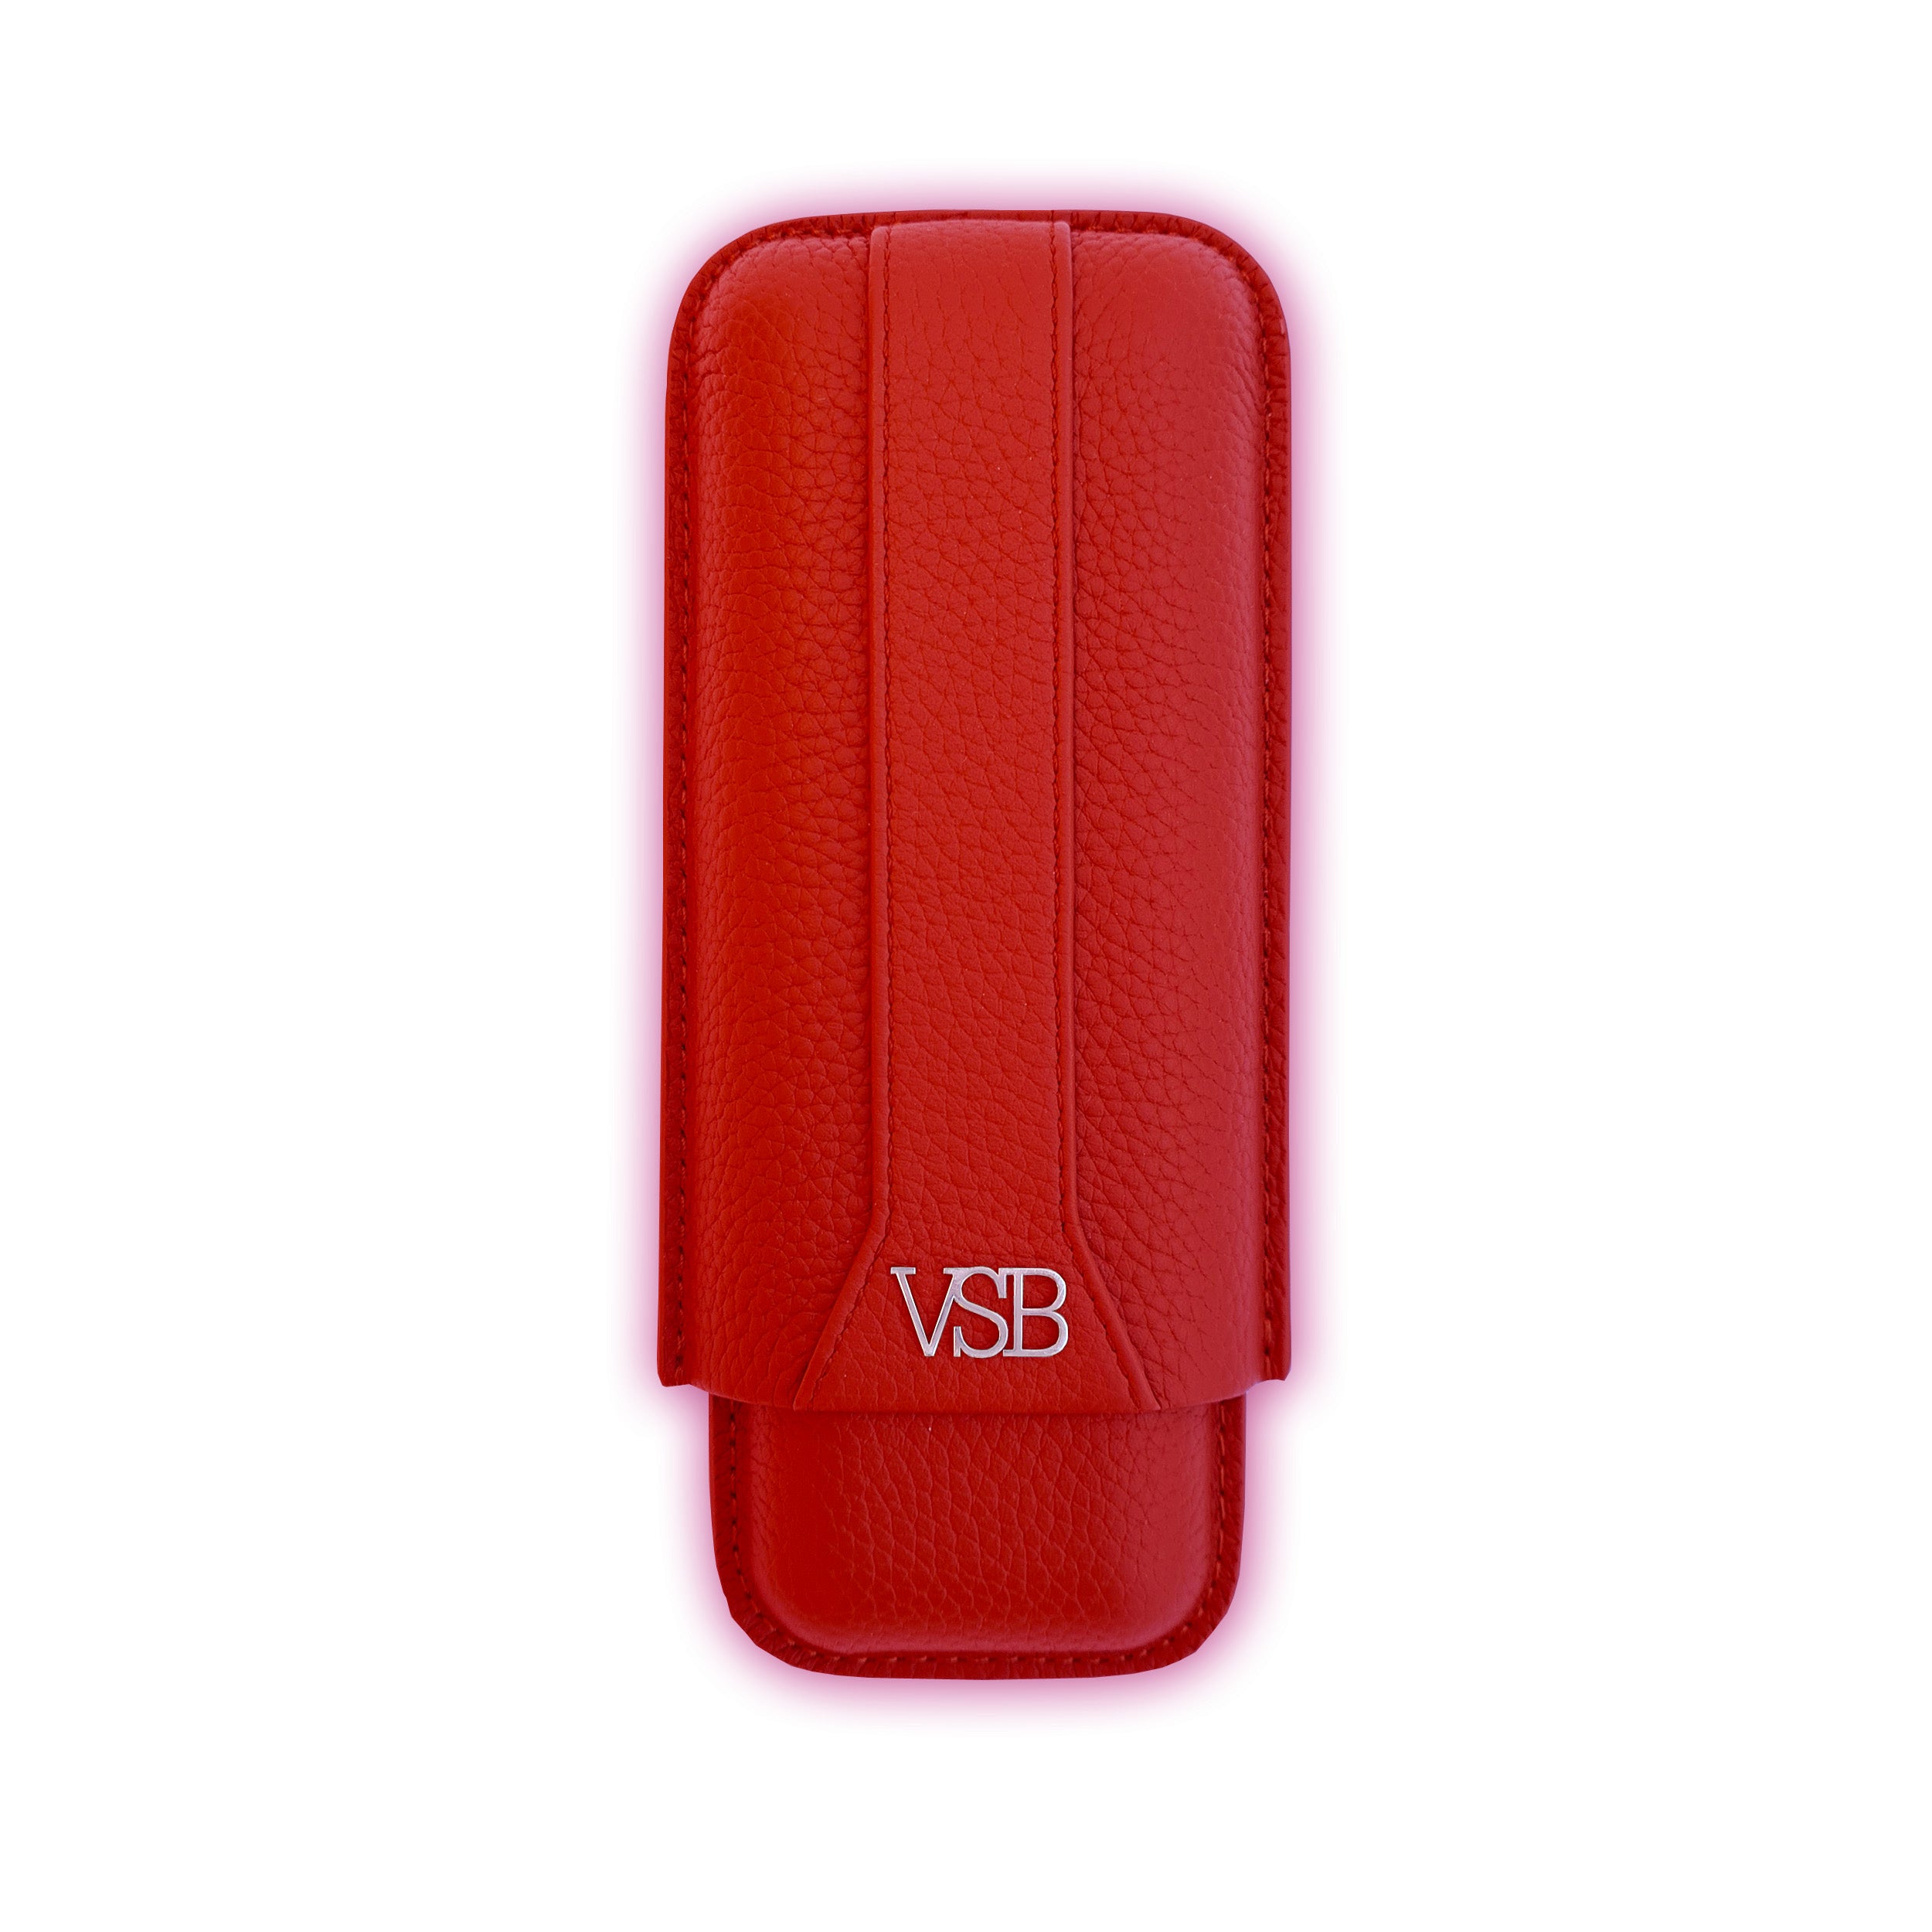 Two Finger Red Leather Cigar Pouch - VSB London